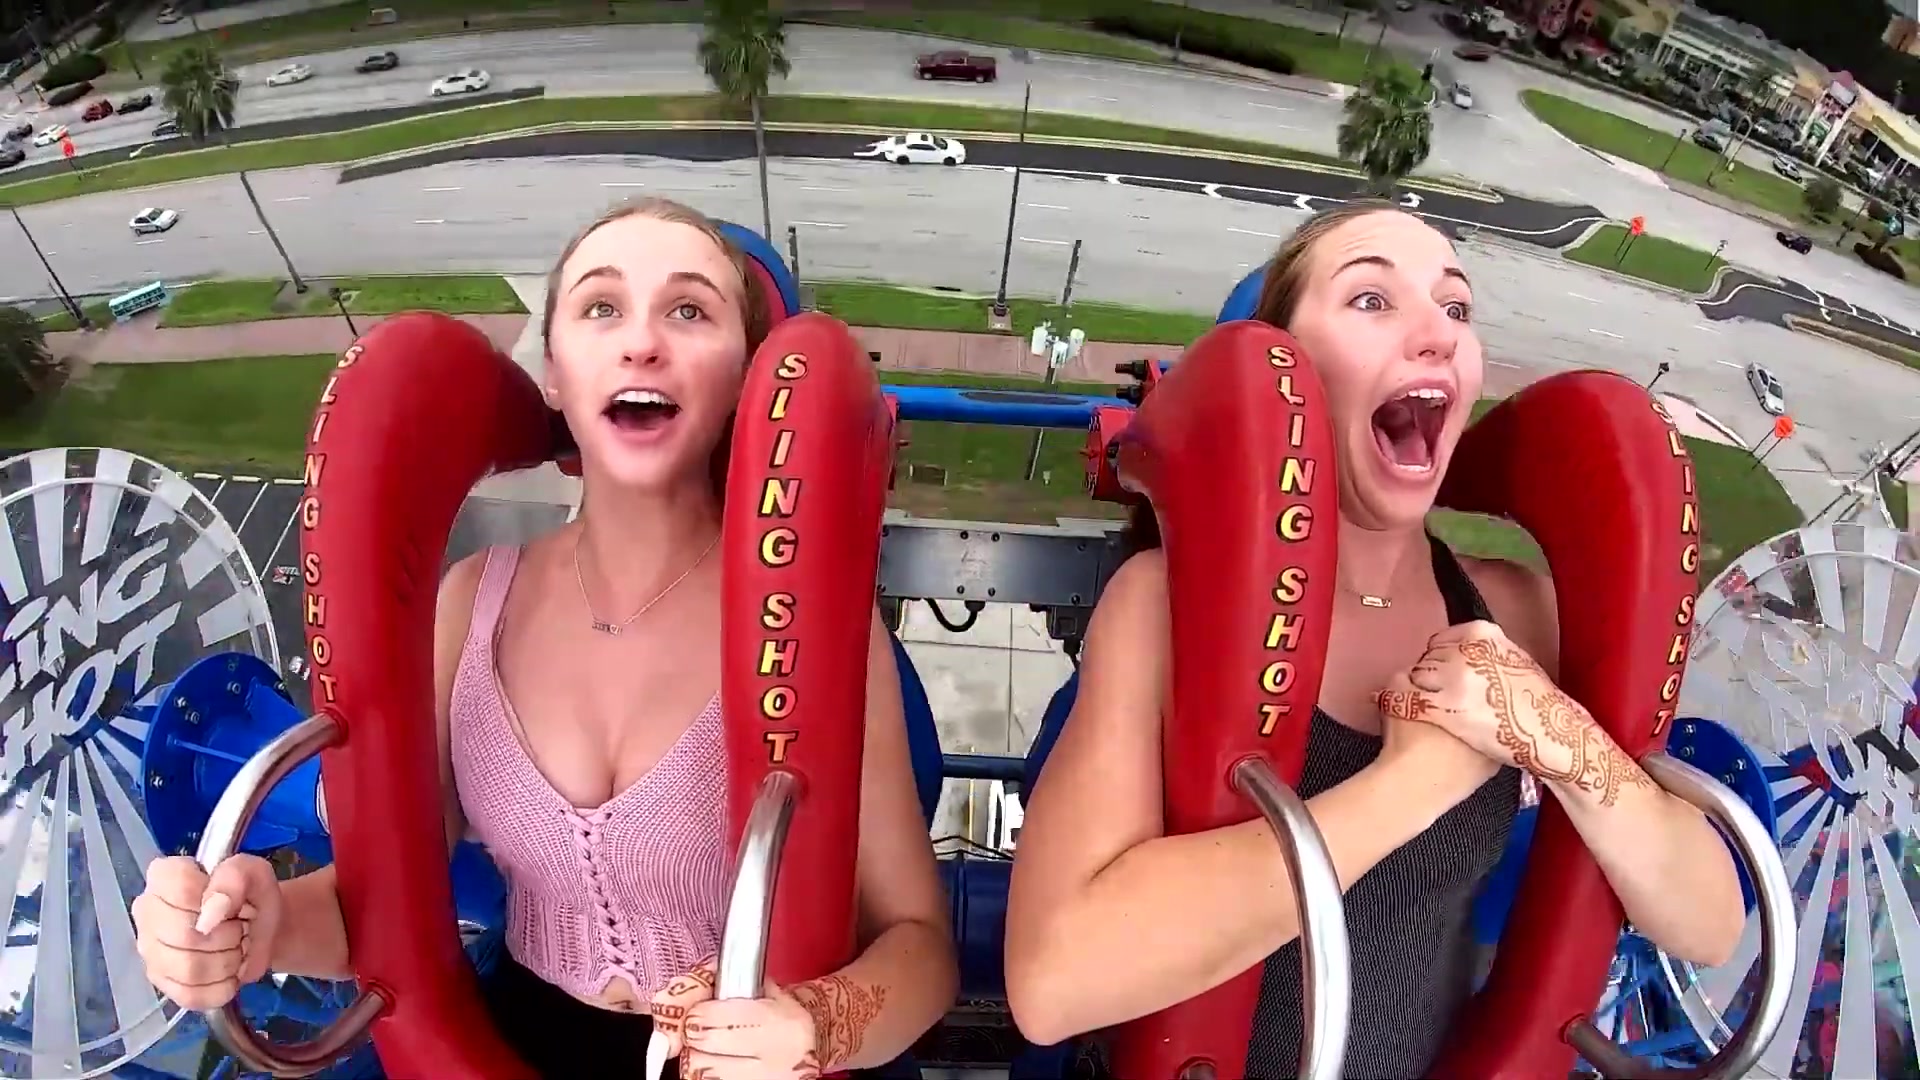 Tits come out on slingshot